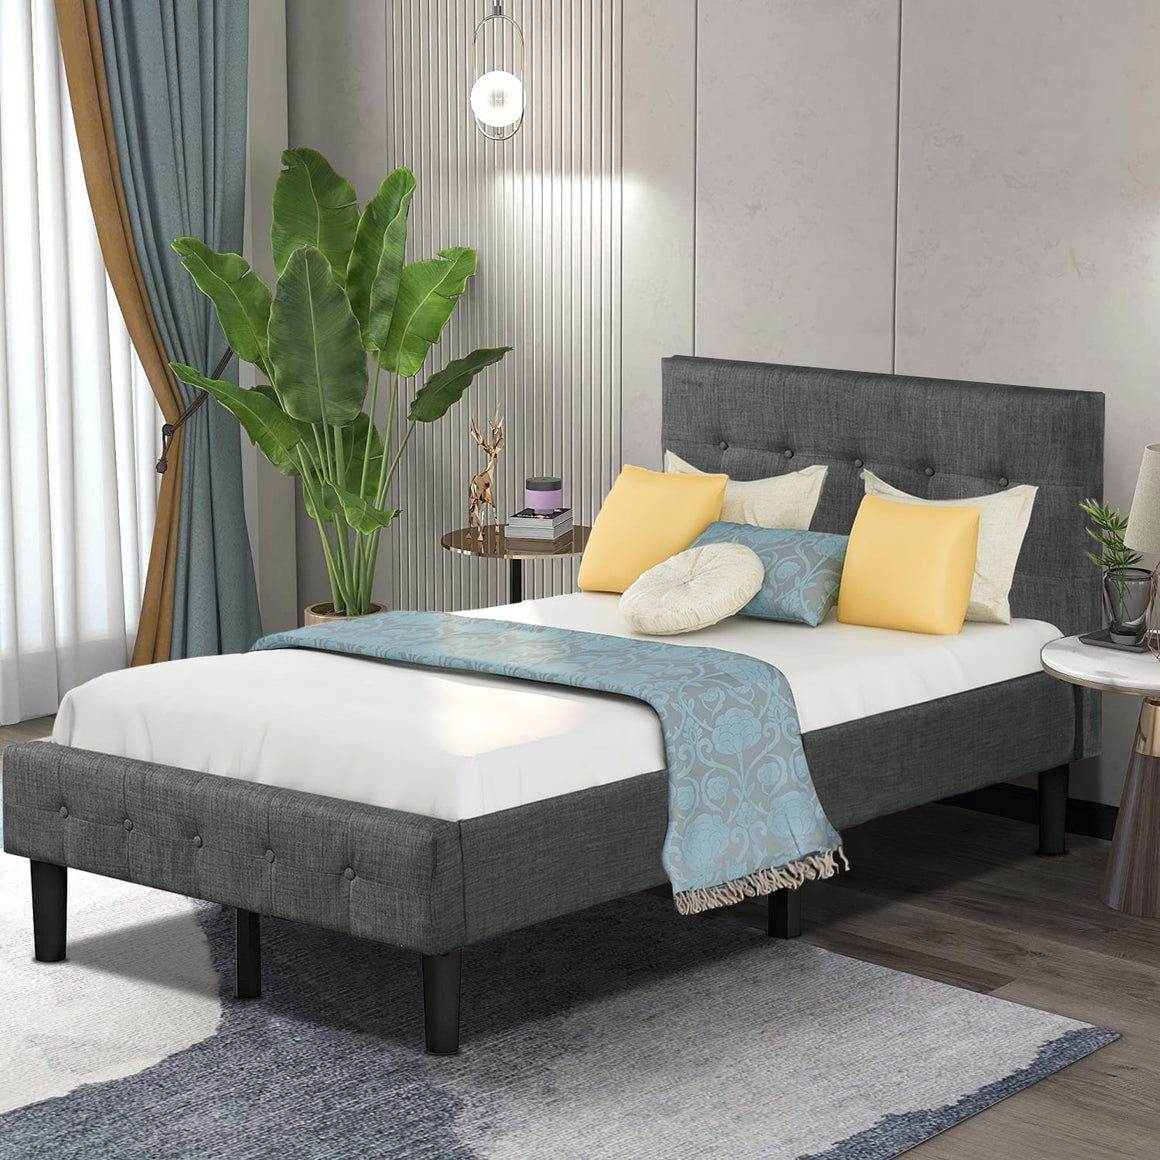 Twin Platform Bed Frame, Wood Twin Bed Frames with Headboard, Button Tufted Twin Bed Frames No Box Spring Needed, Modern Bedroom Furniture, Twin Bed Frames for kids/Adults, Gray, W7403